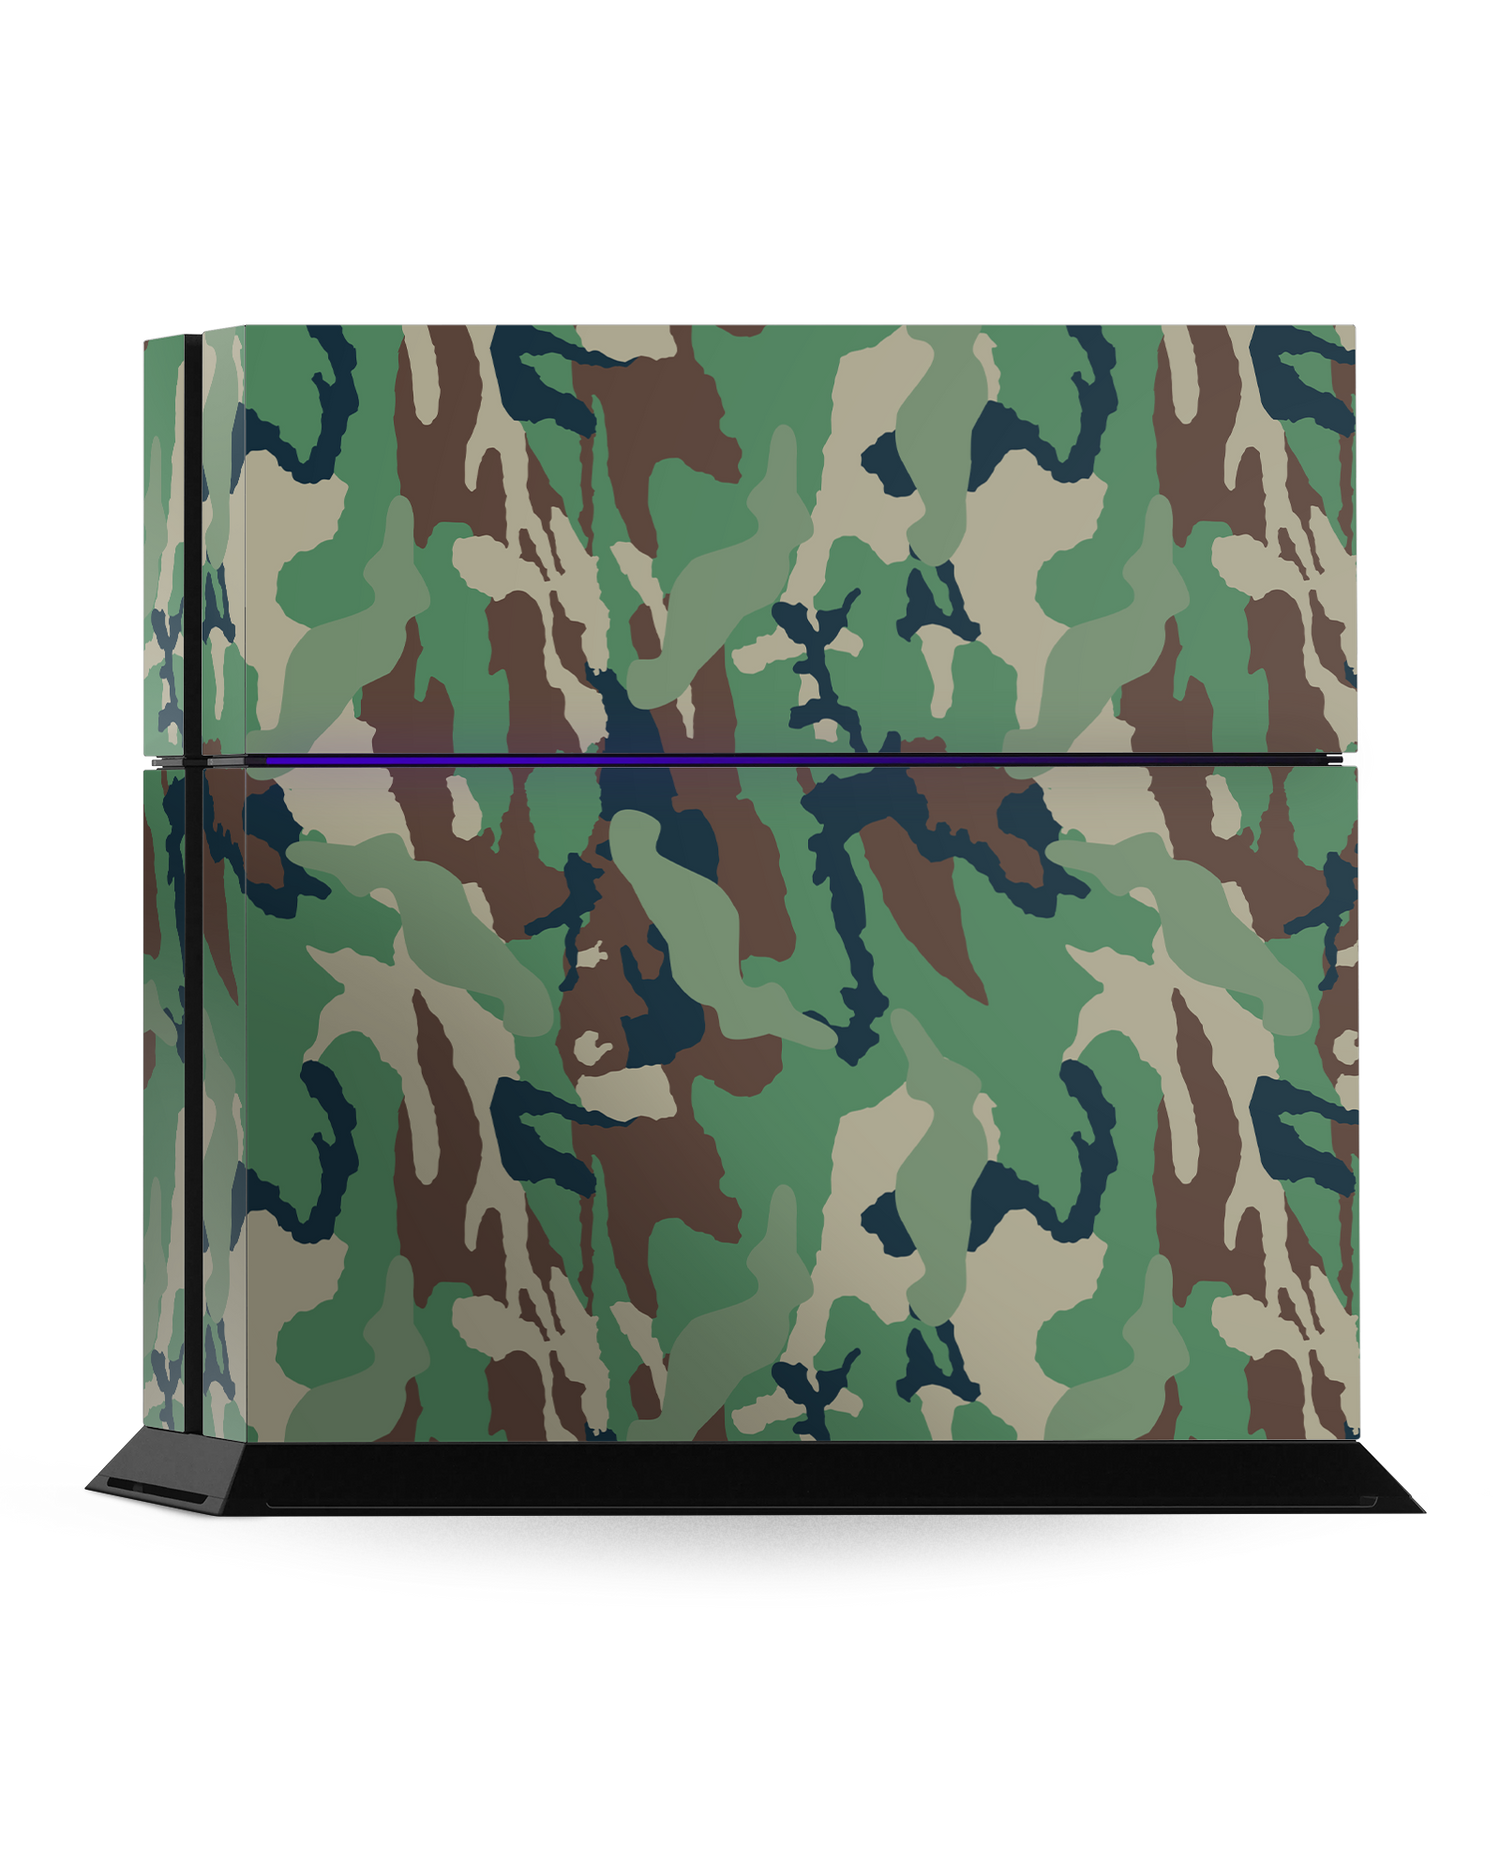 Green and Brown Camo Console Skin for Sony PlayStation 4: Standing